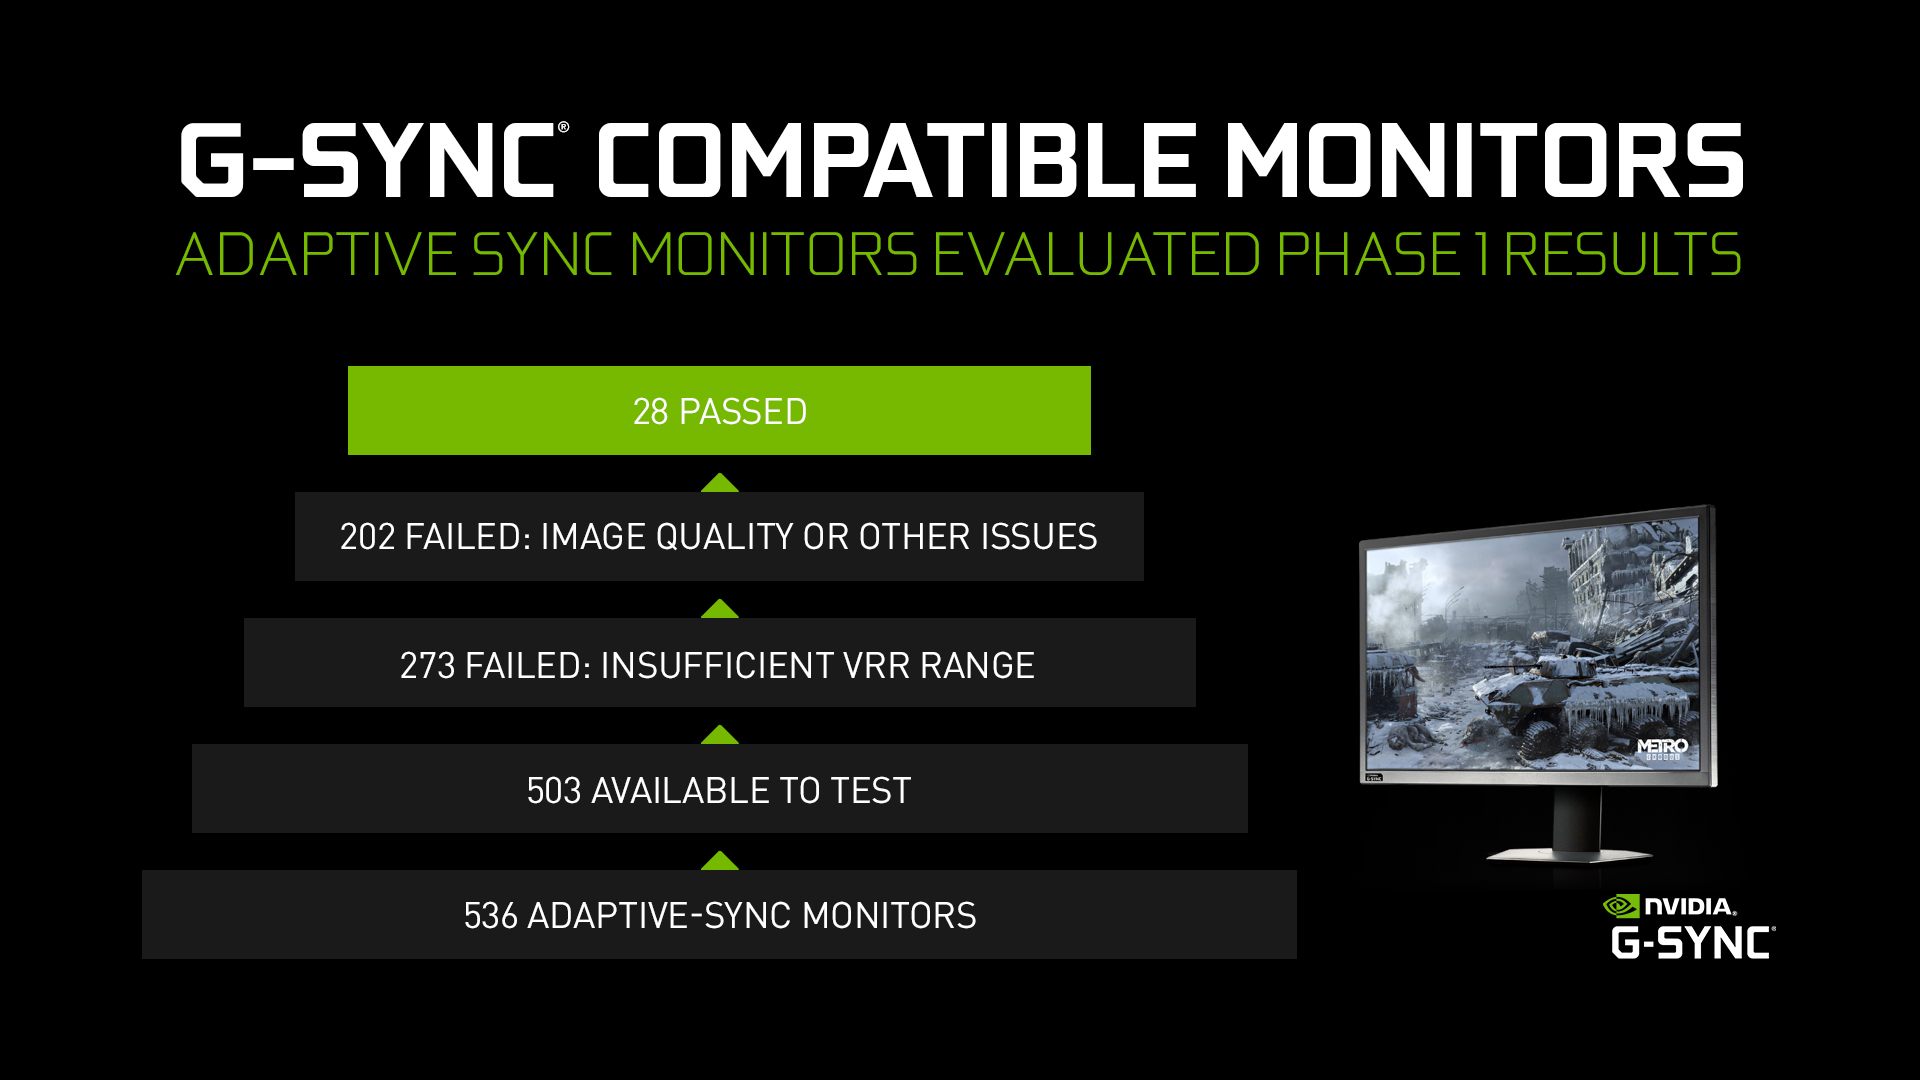 G-SYNC Compatible Testing, Phase 1 Complete: 5% Adaptive-Sync Monitors Made The Cut | GeForce News | NVIDIA